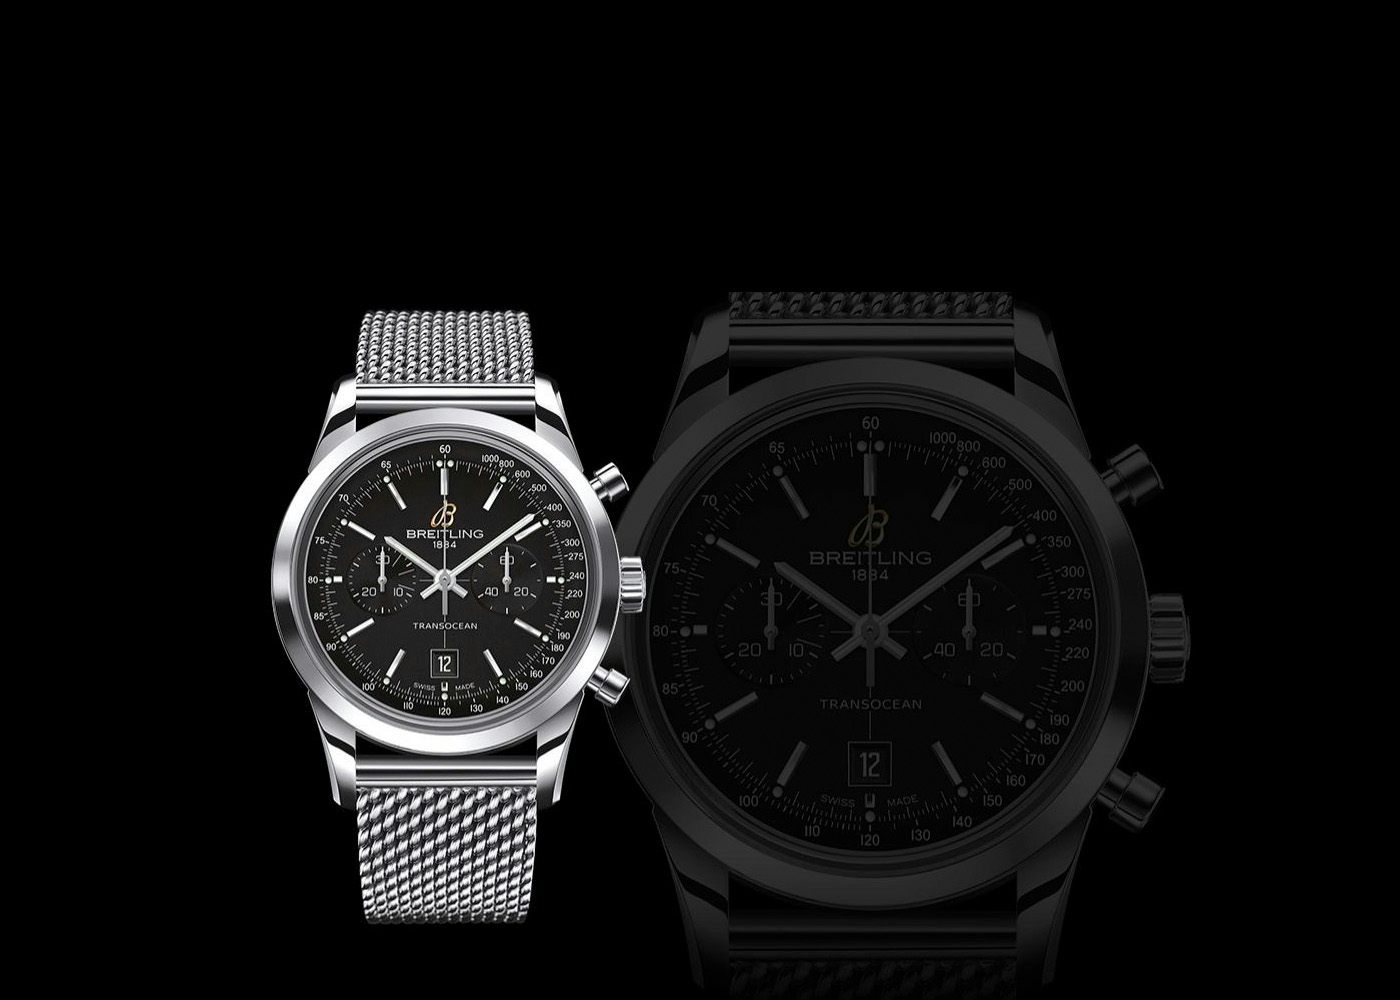 Beautiful Breitling, the Transocean Chronograph - Monochrome Watches